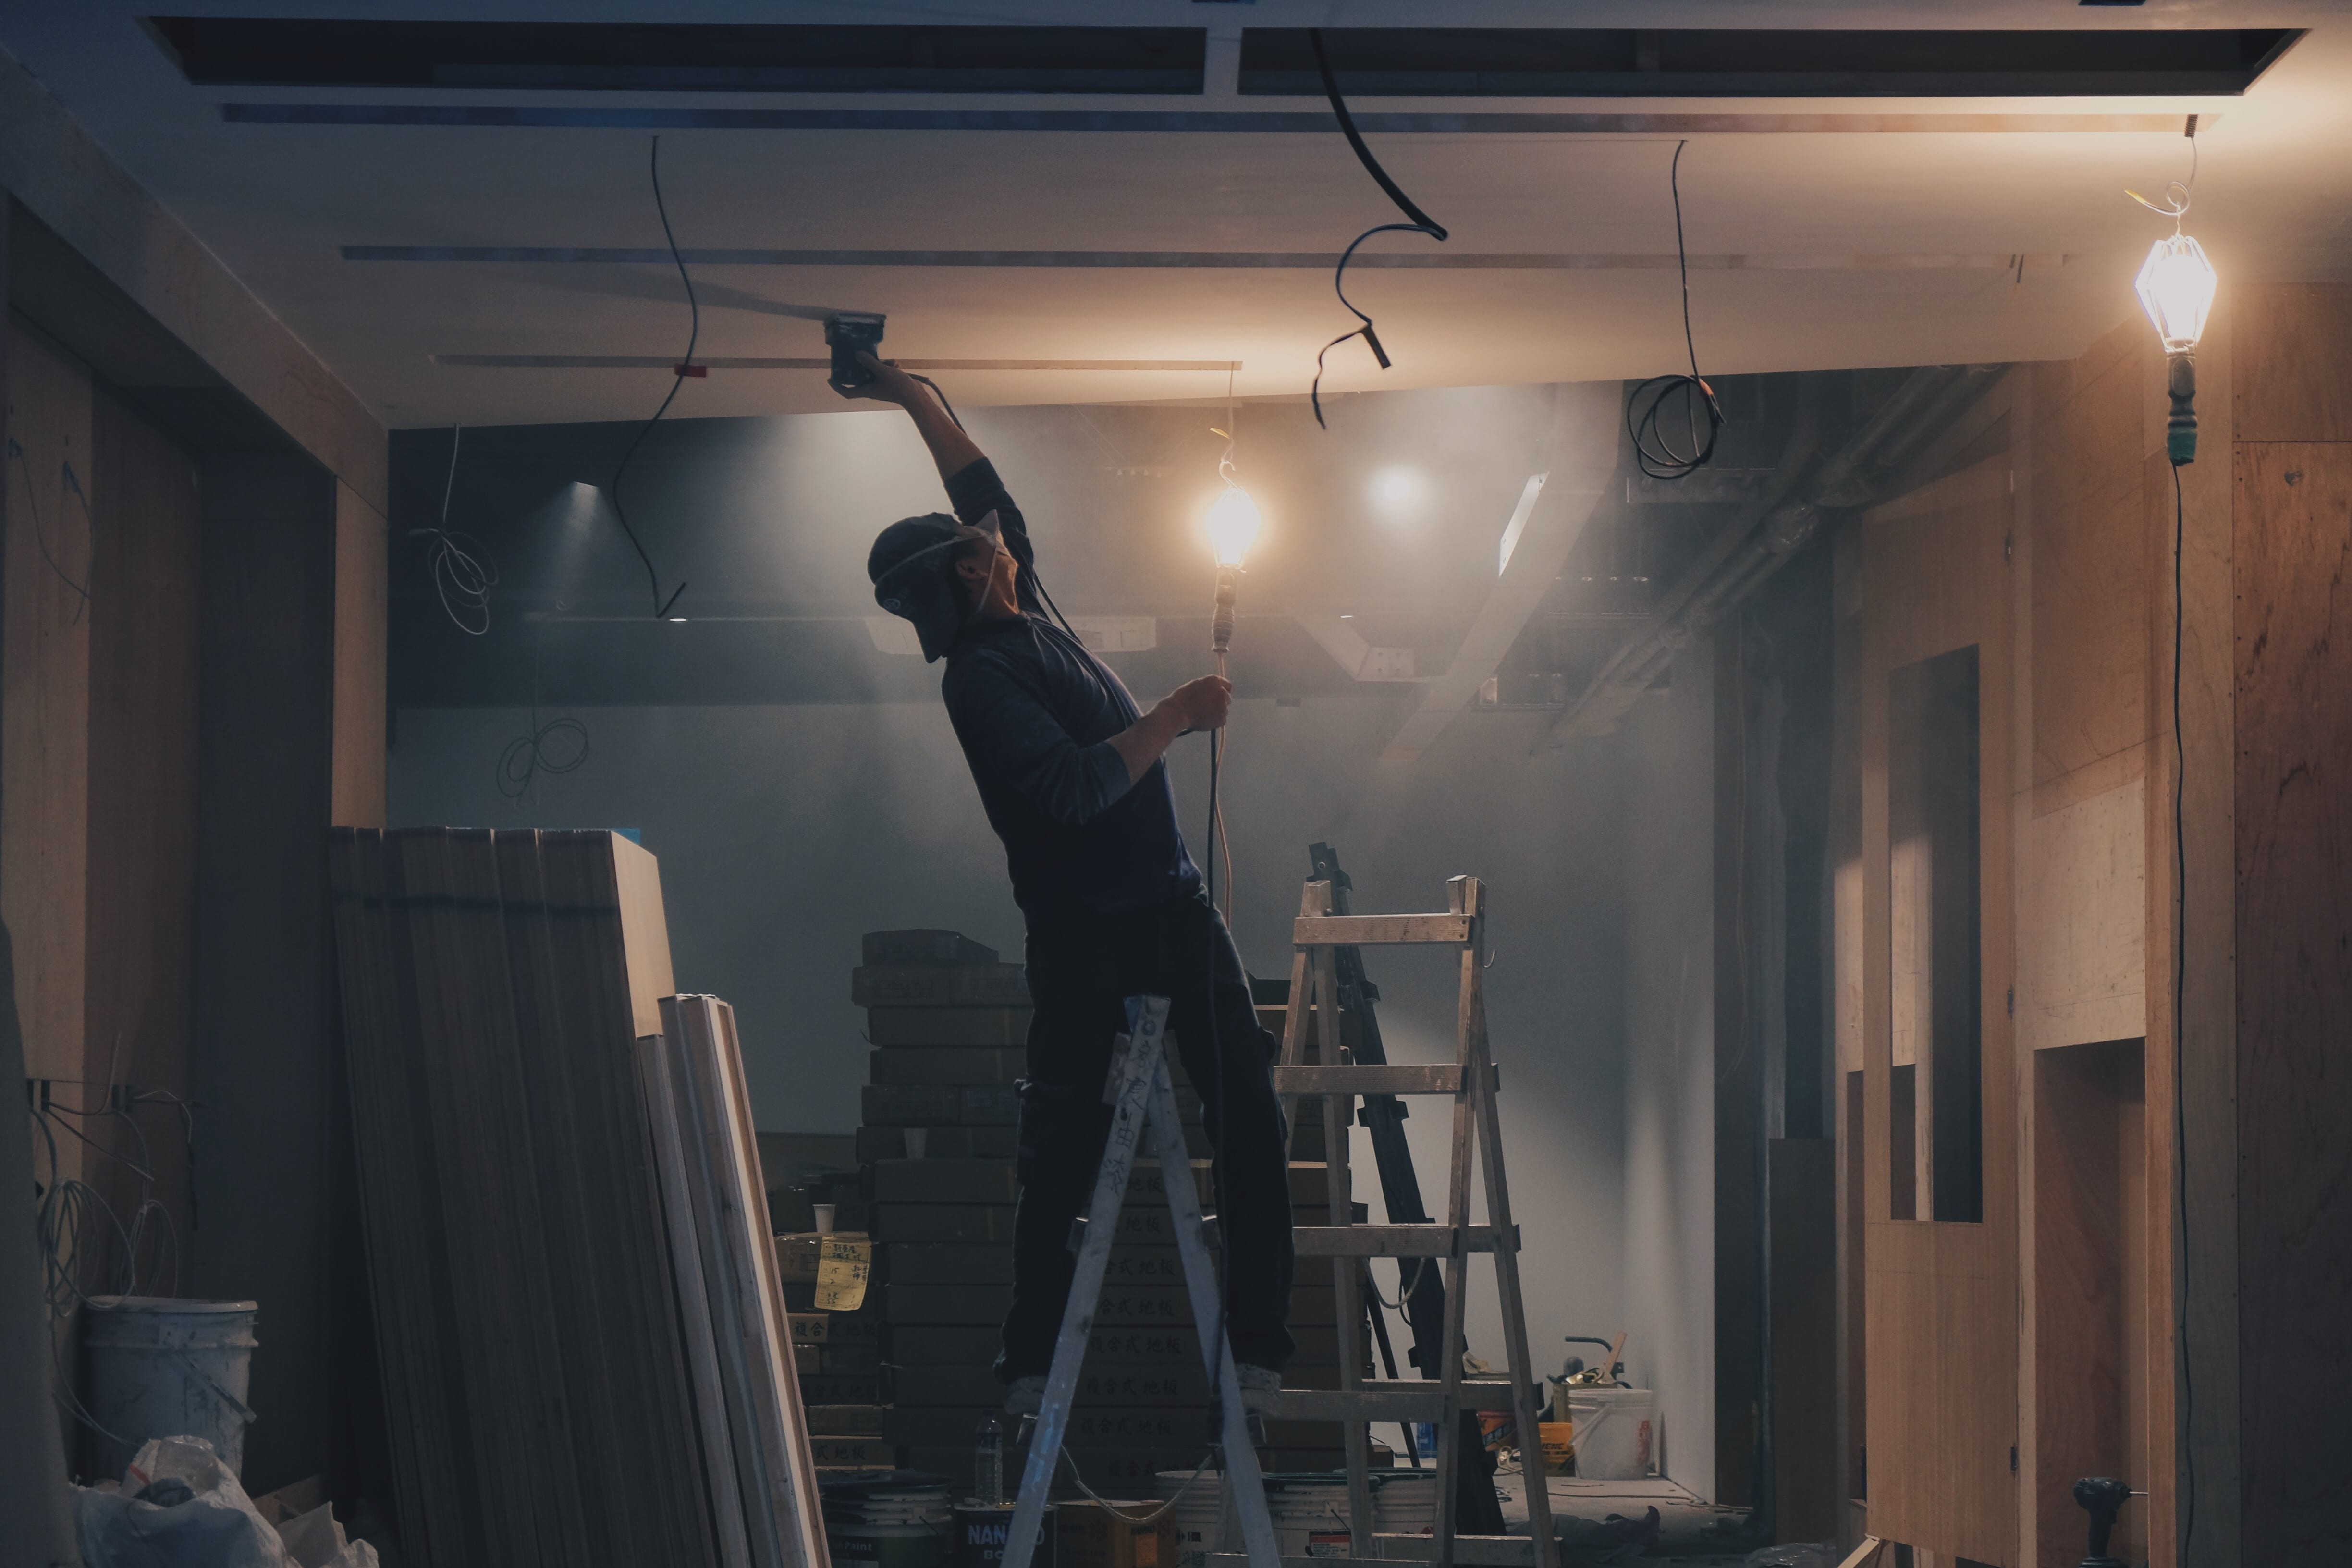 Man on ladder, working on ceiling in construction; image by Henry & Co., via Unsplash.com.